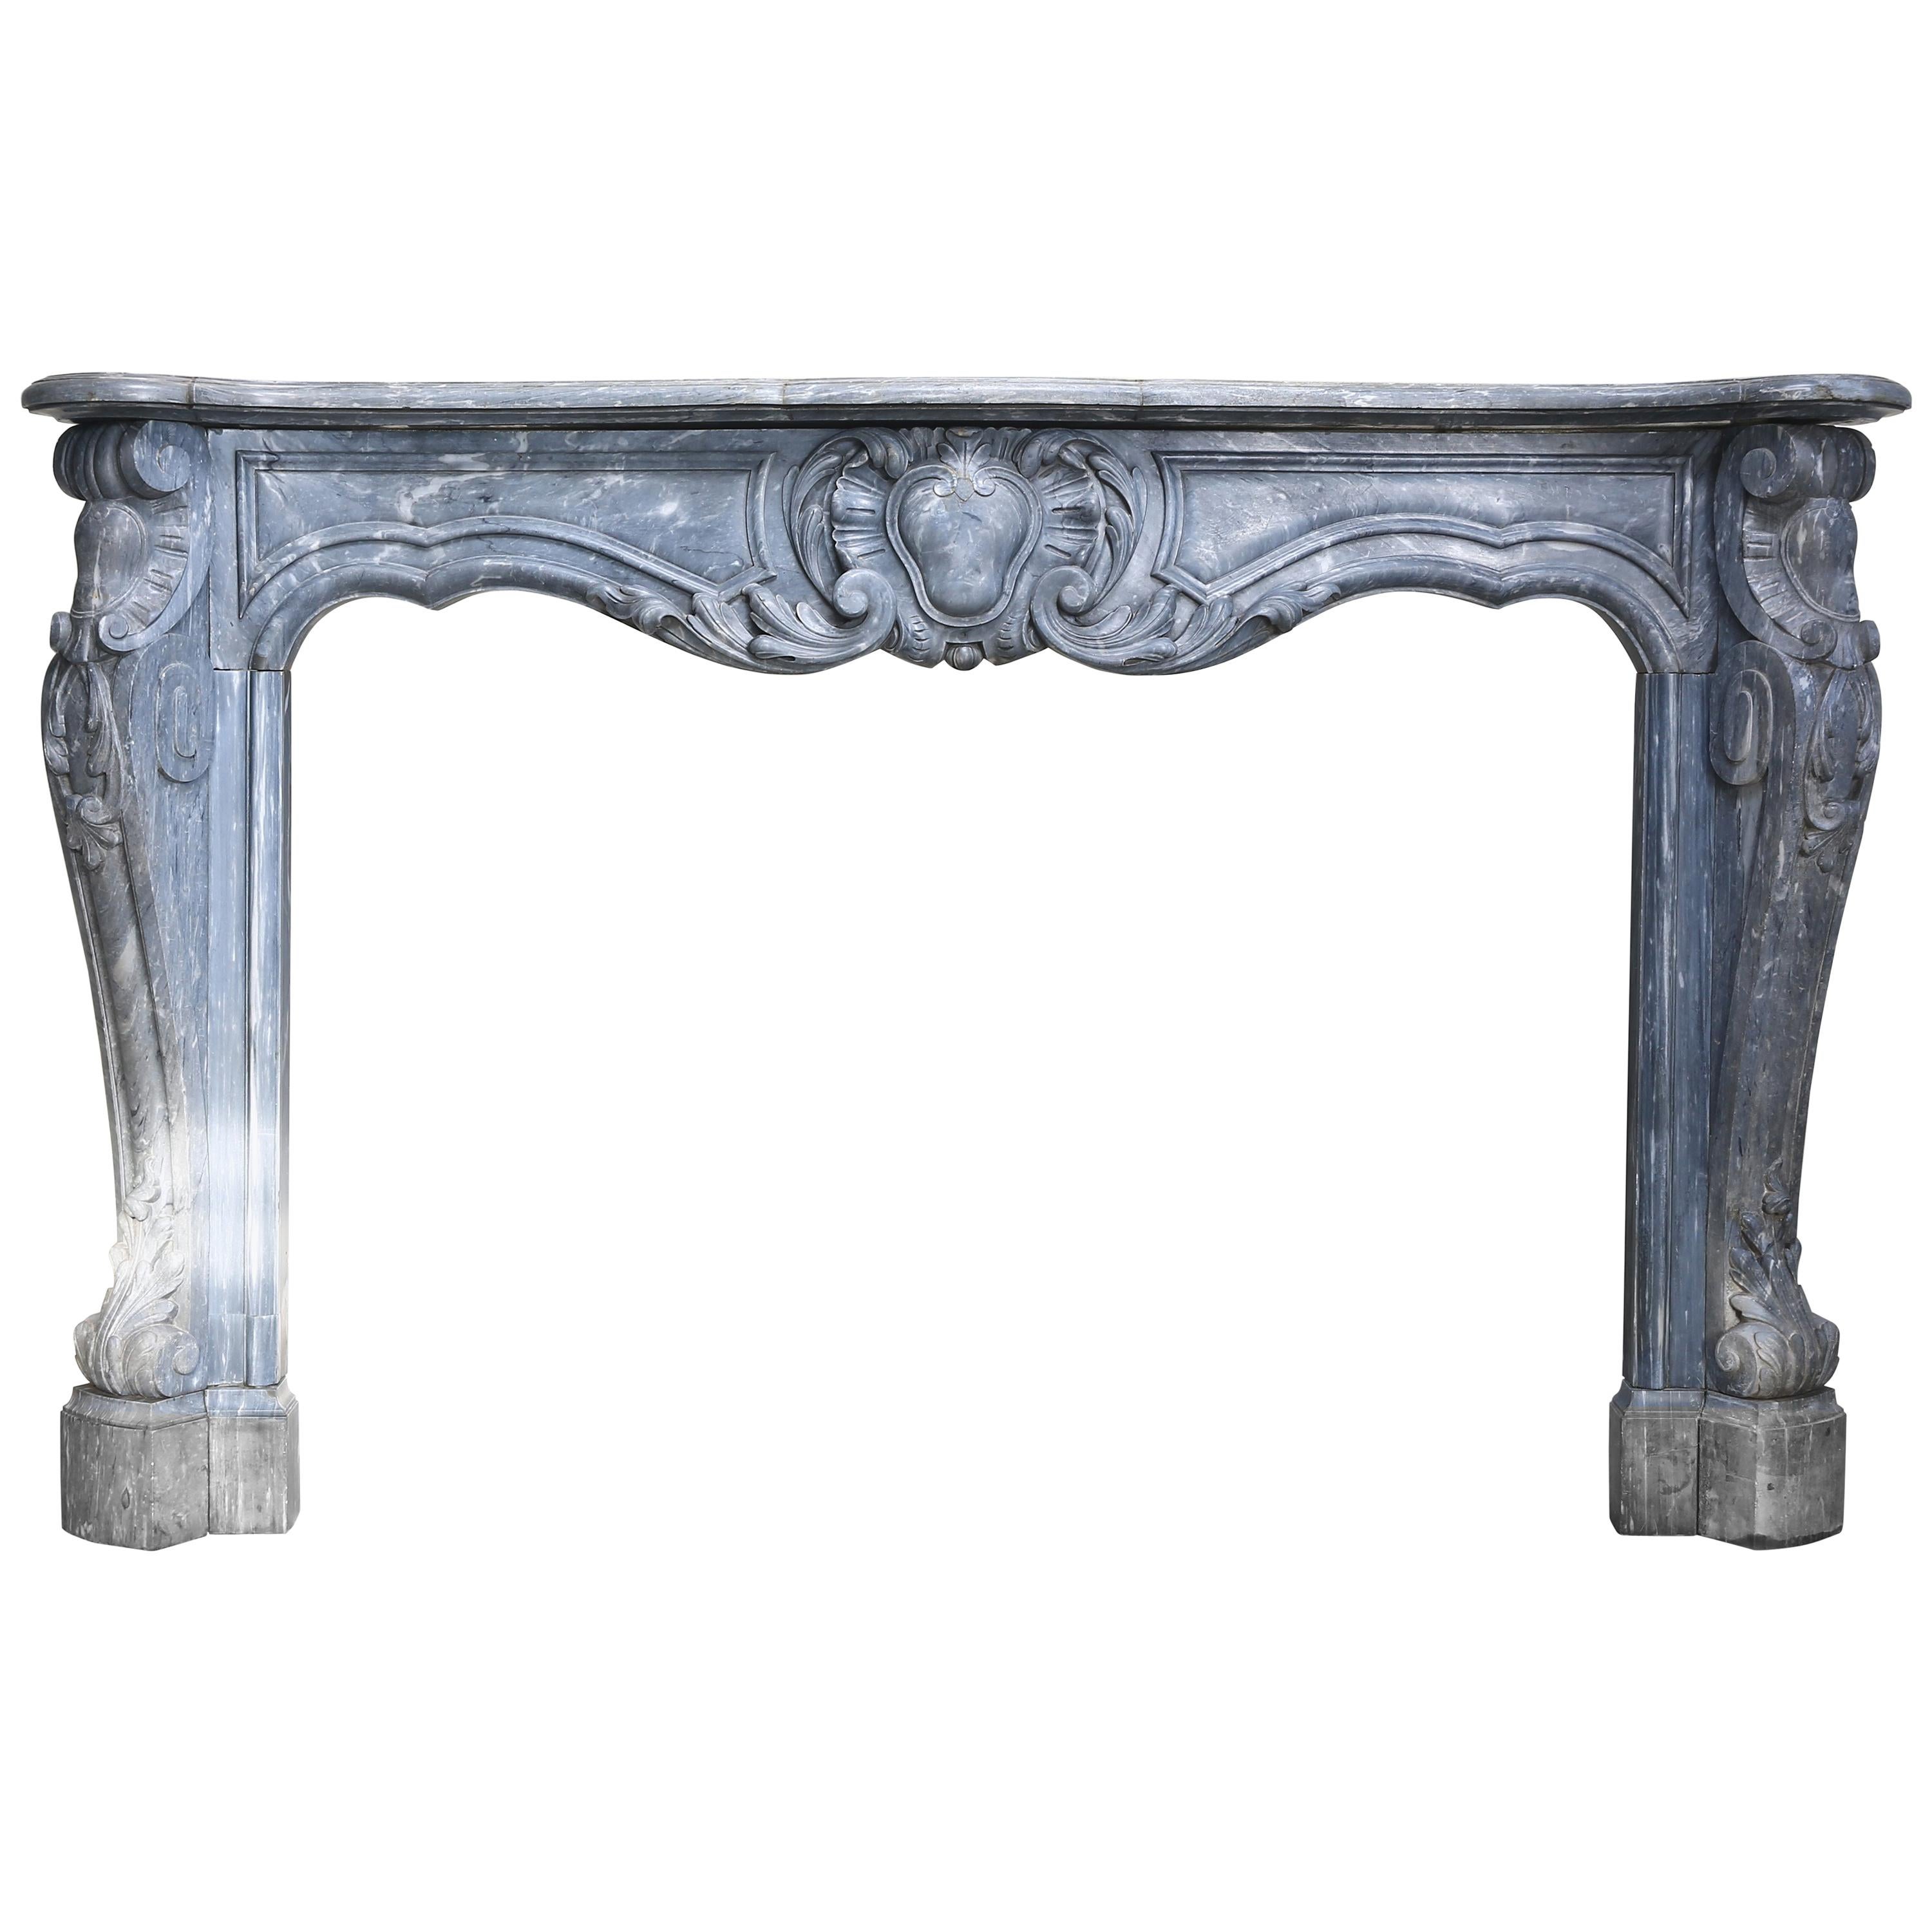 Antique Grey/Blue Marble Fireplace, 18th Century, Louis XV For Sale